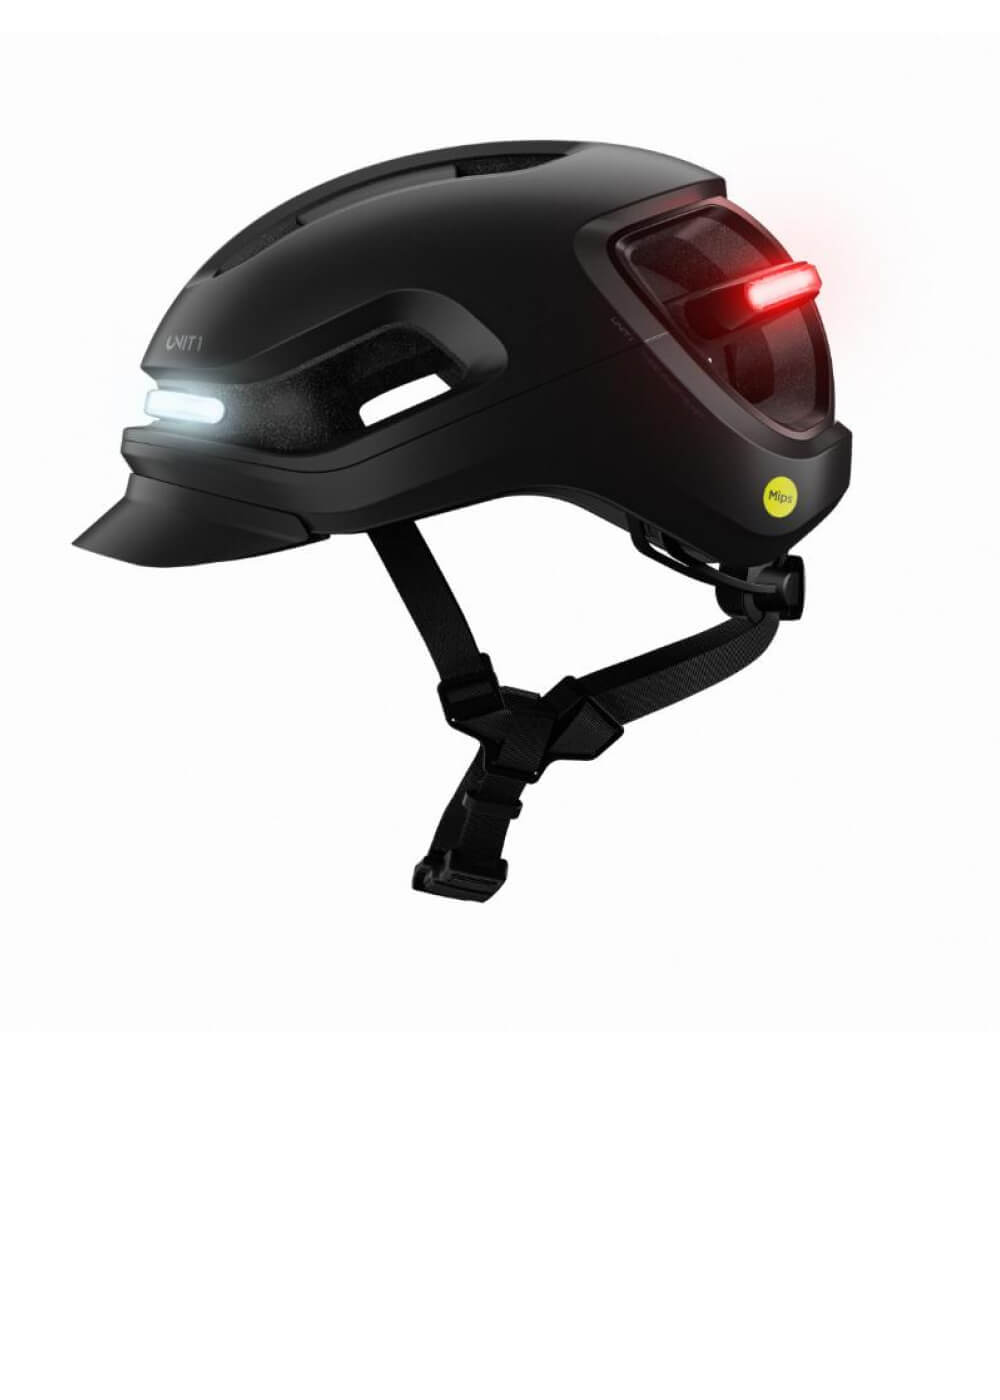 AURA smart helmet with lights for road and e-bikes | UNIT 1